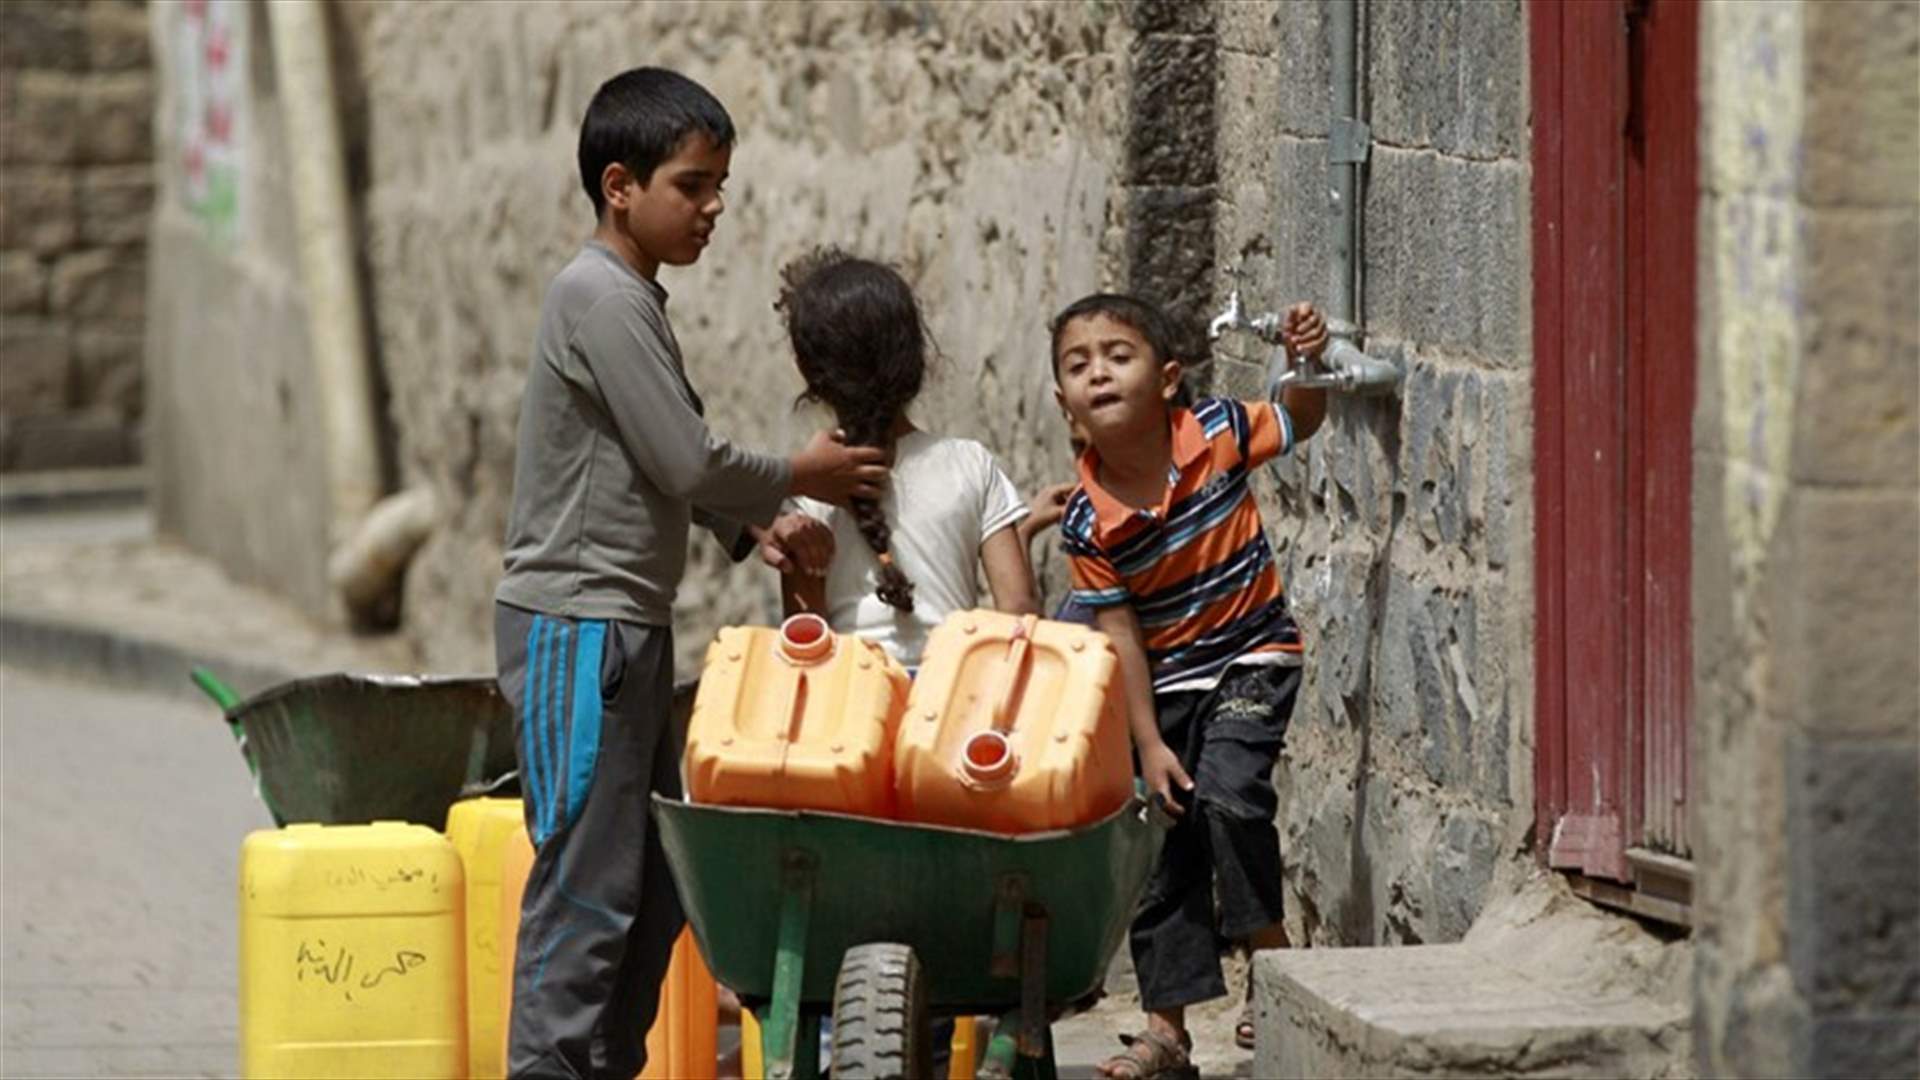 More than 8 million Yemenis &quot;a step away from famine&quot; - UN